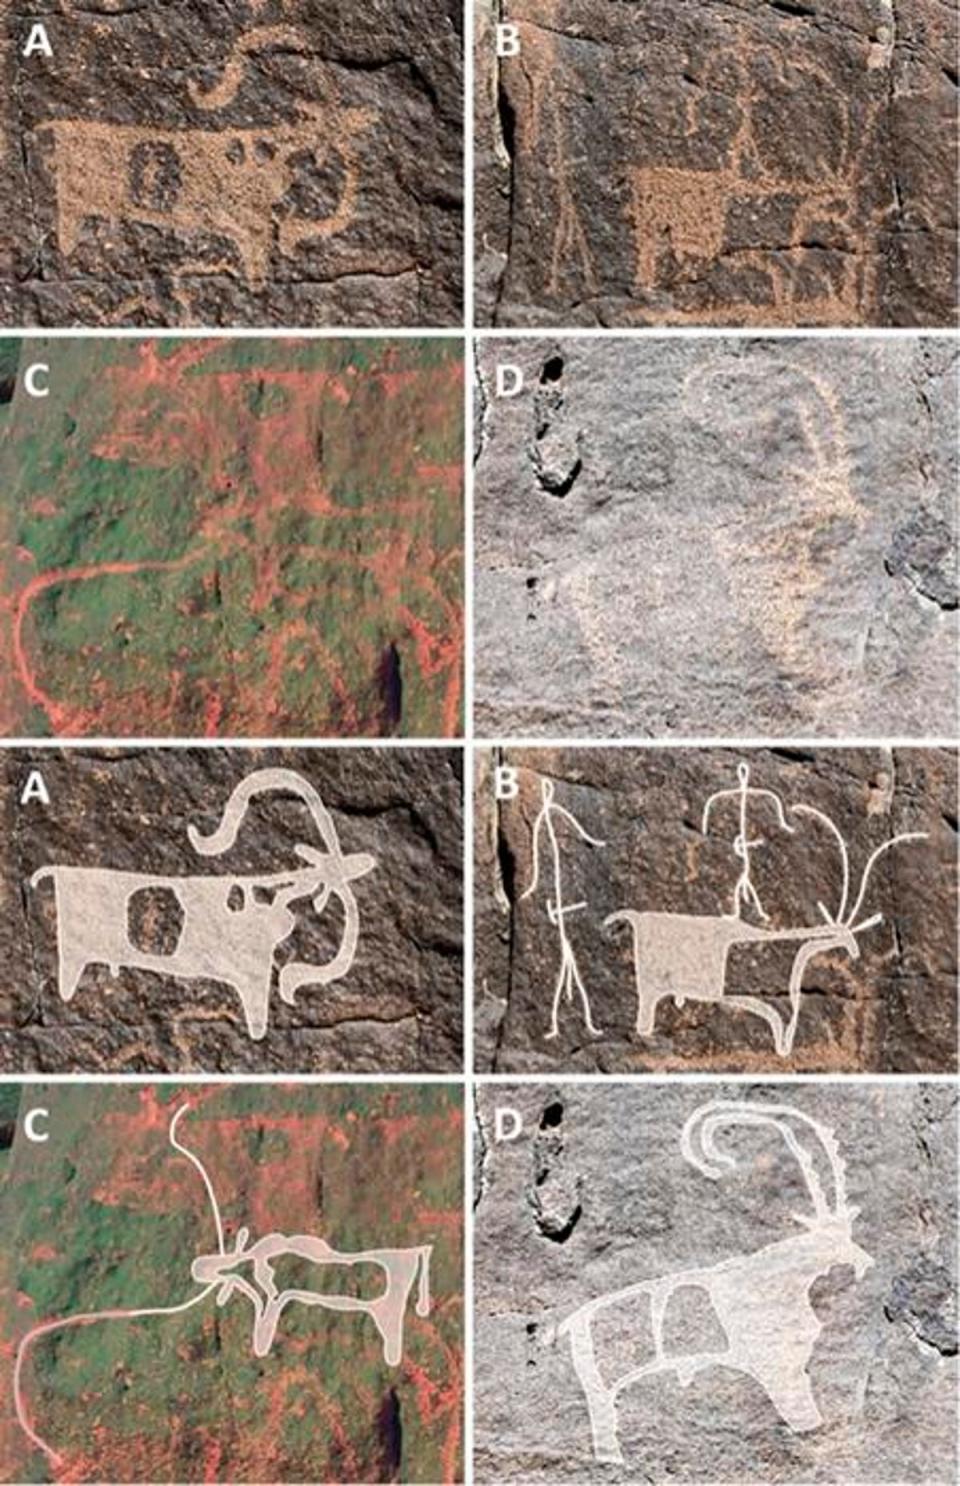 Rock art at Umm Jirsan shows sheep, goat, two stick figures with tools on their belts, horned cattle, and ibex with ribbed horns and coat markings. (Stewart et al., 2024, PLOS ONE)